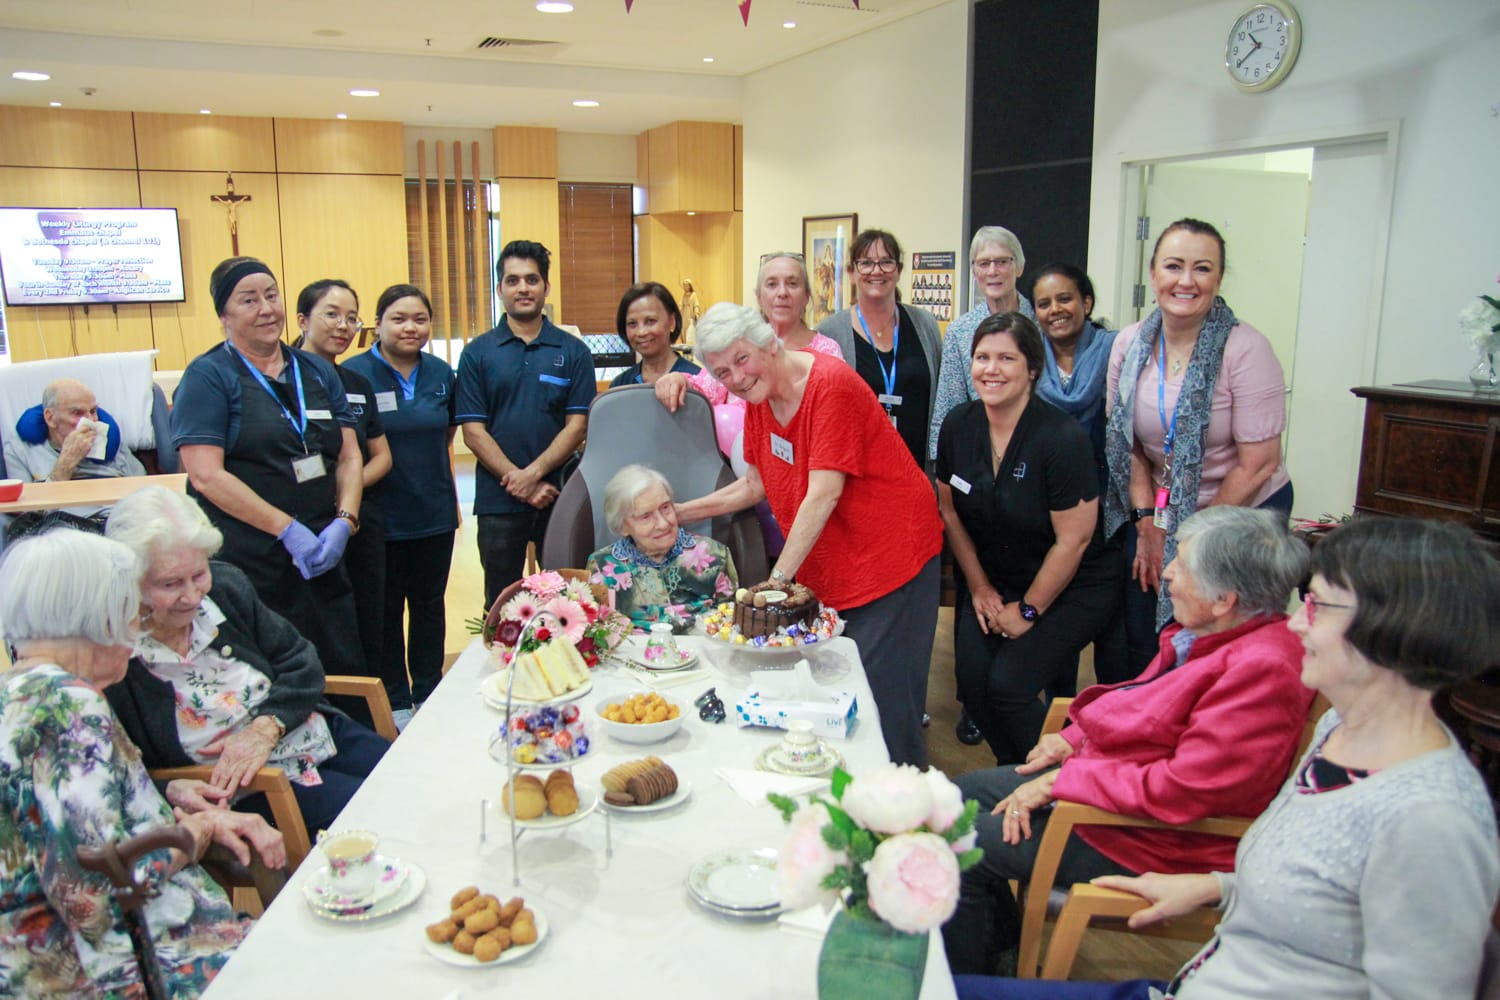 Aged care team members and residents crowd Sister Jeanne to sing Happy Birthday.